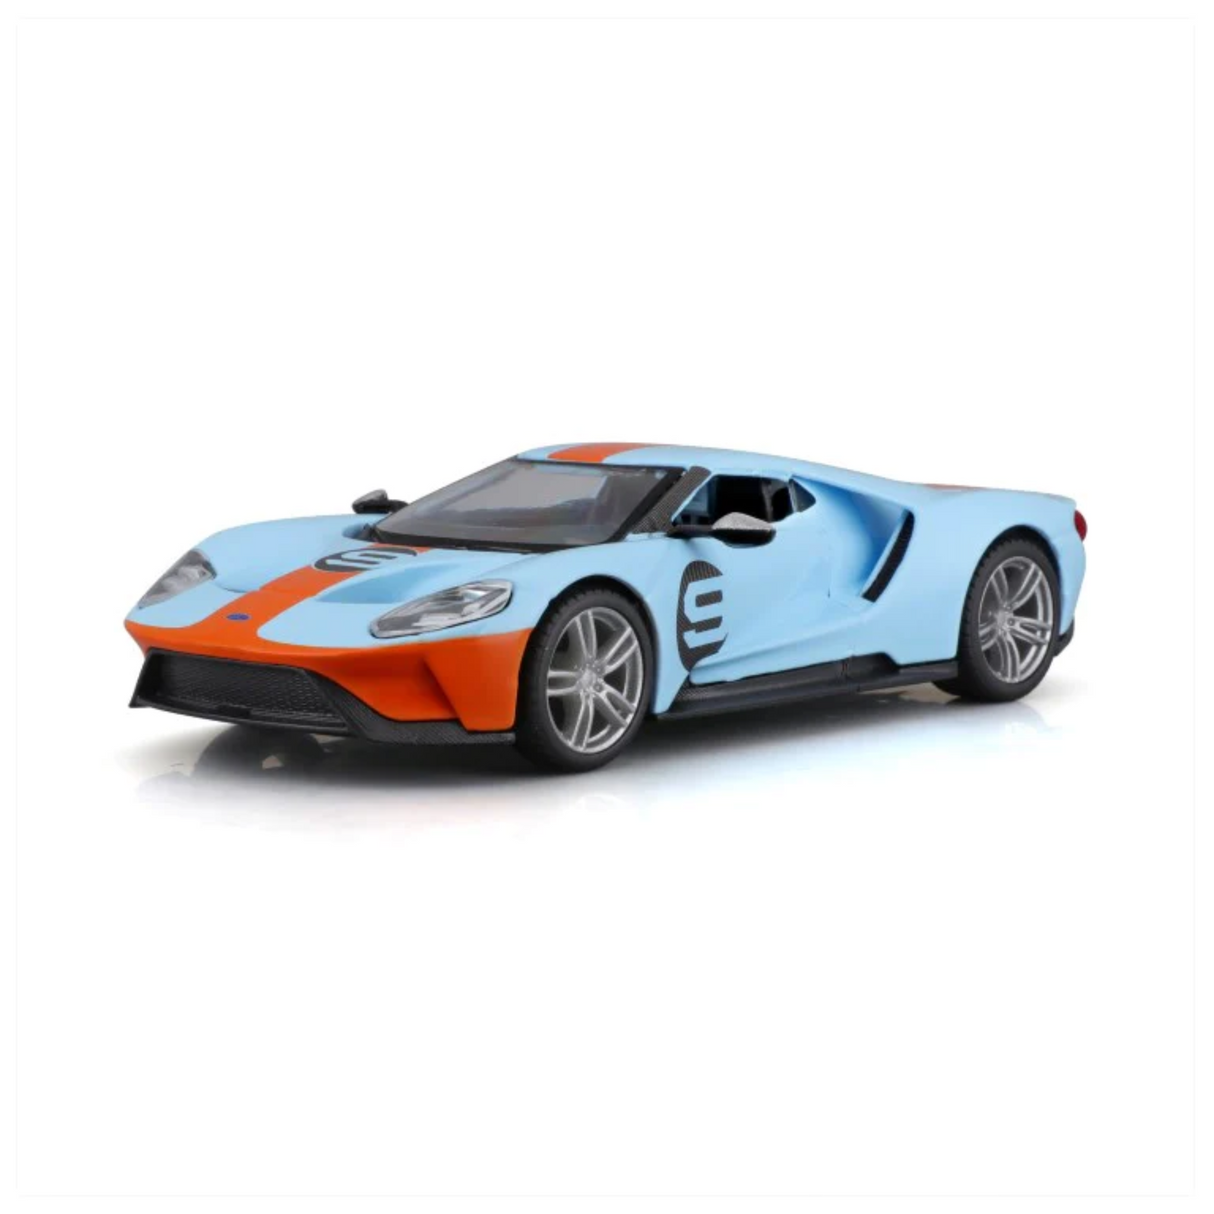 BBurago 2019 Ford GT Heritage Edition - #9 Light Blue 1:32 Scale